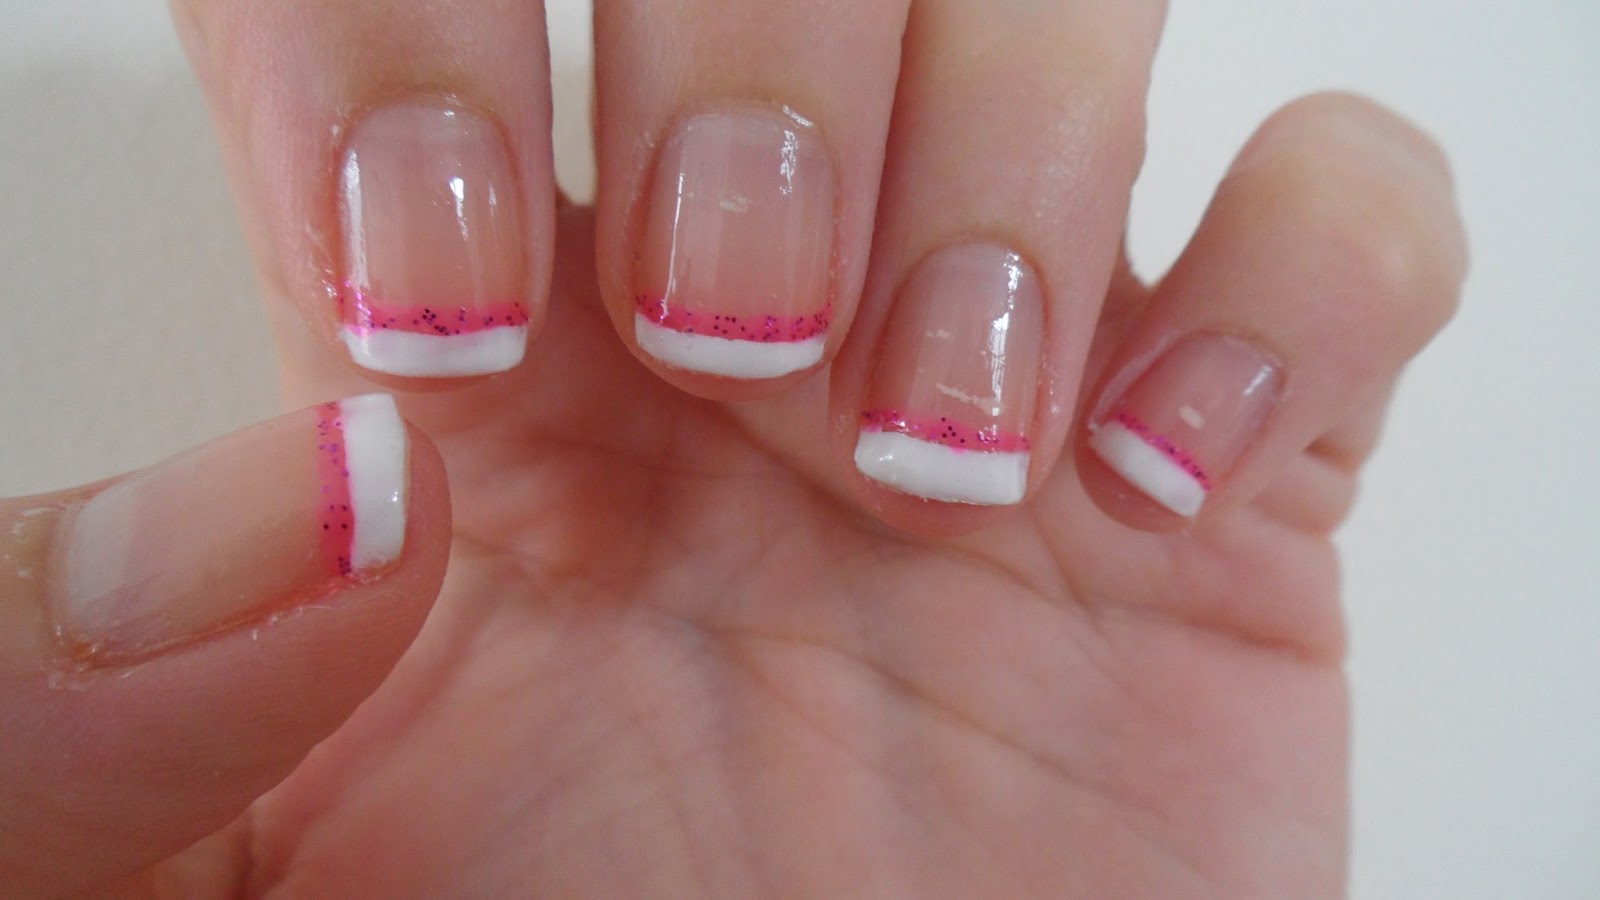 4. "Consider a classic French manicure for a timeless and polished look" - wide 3